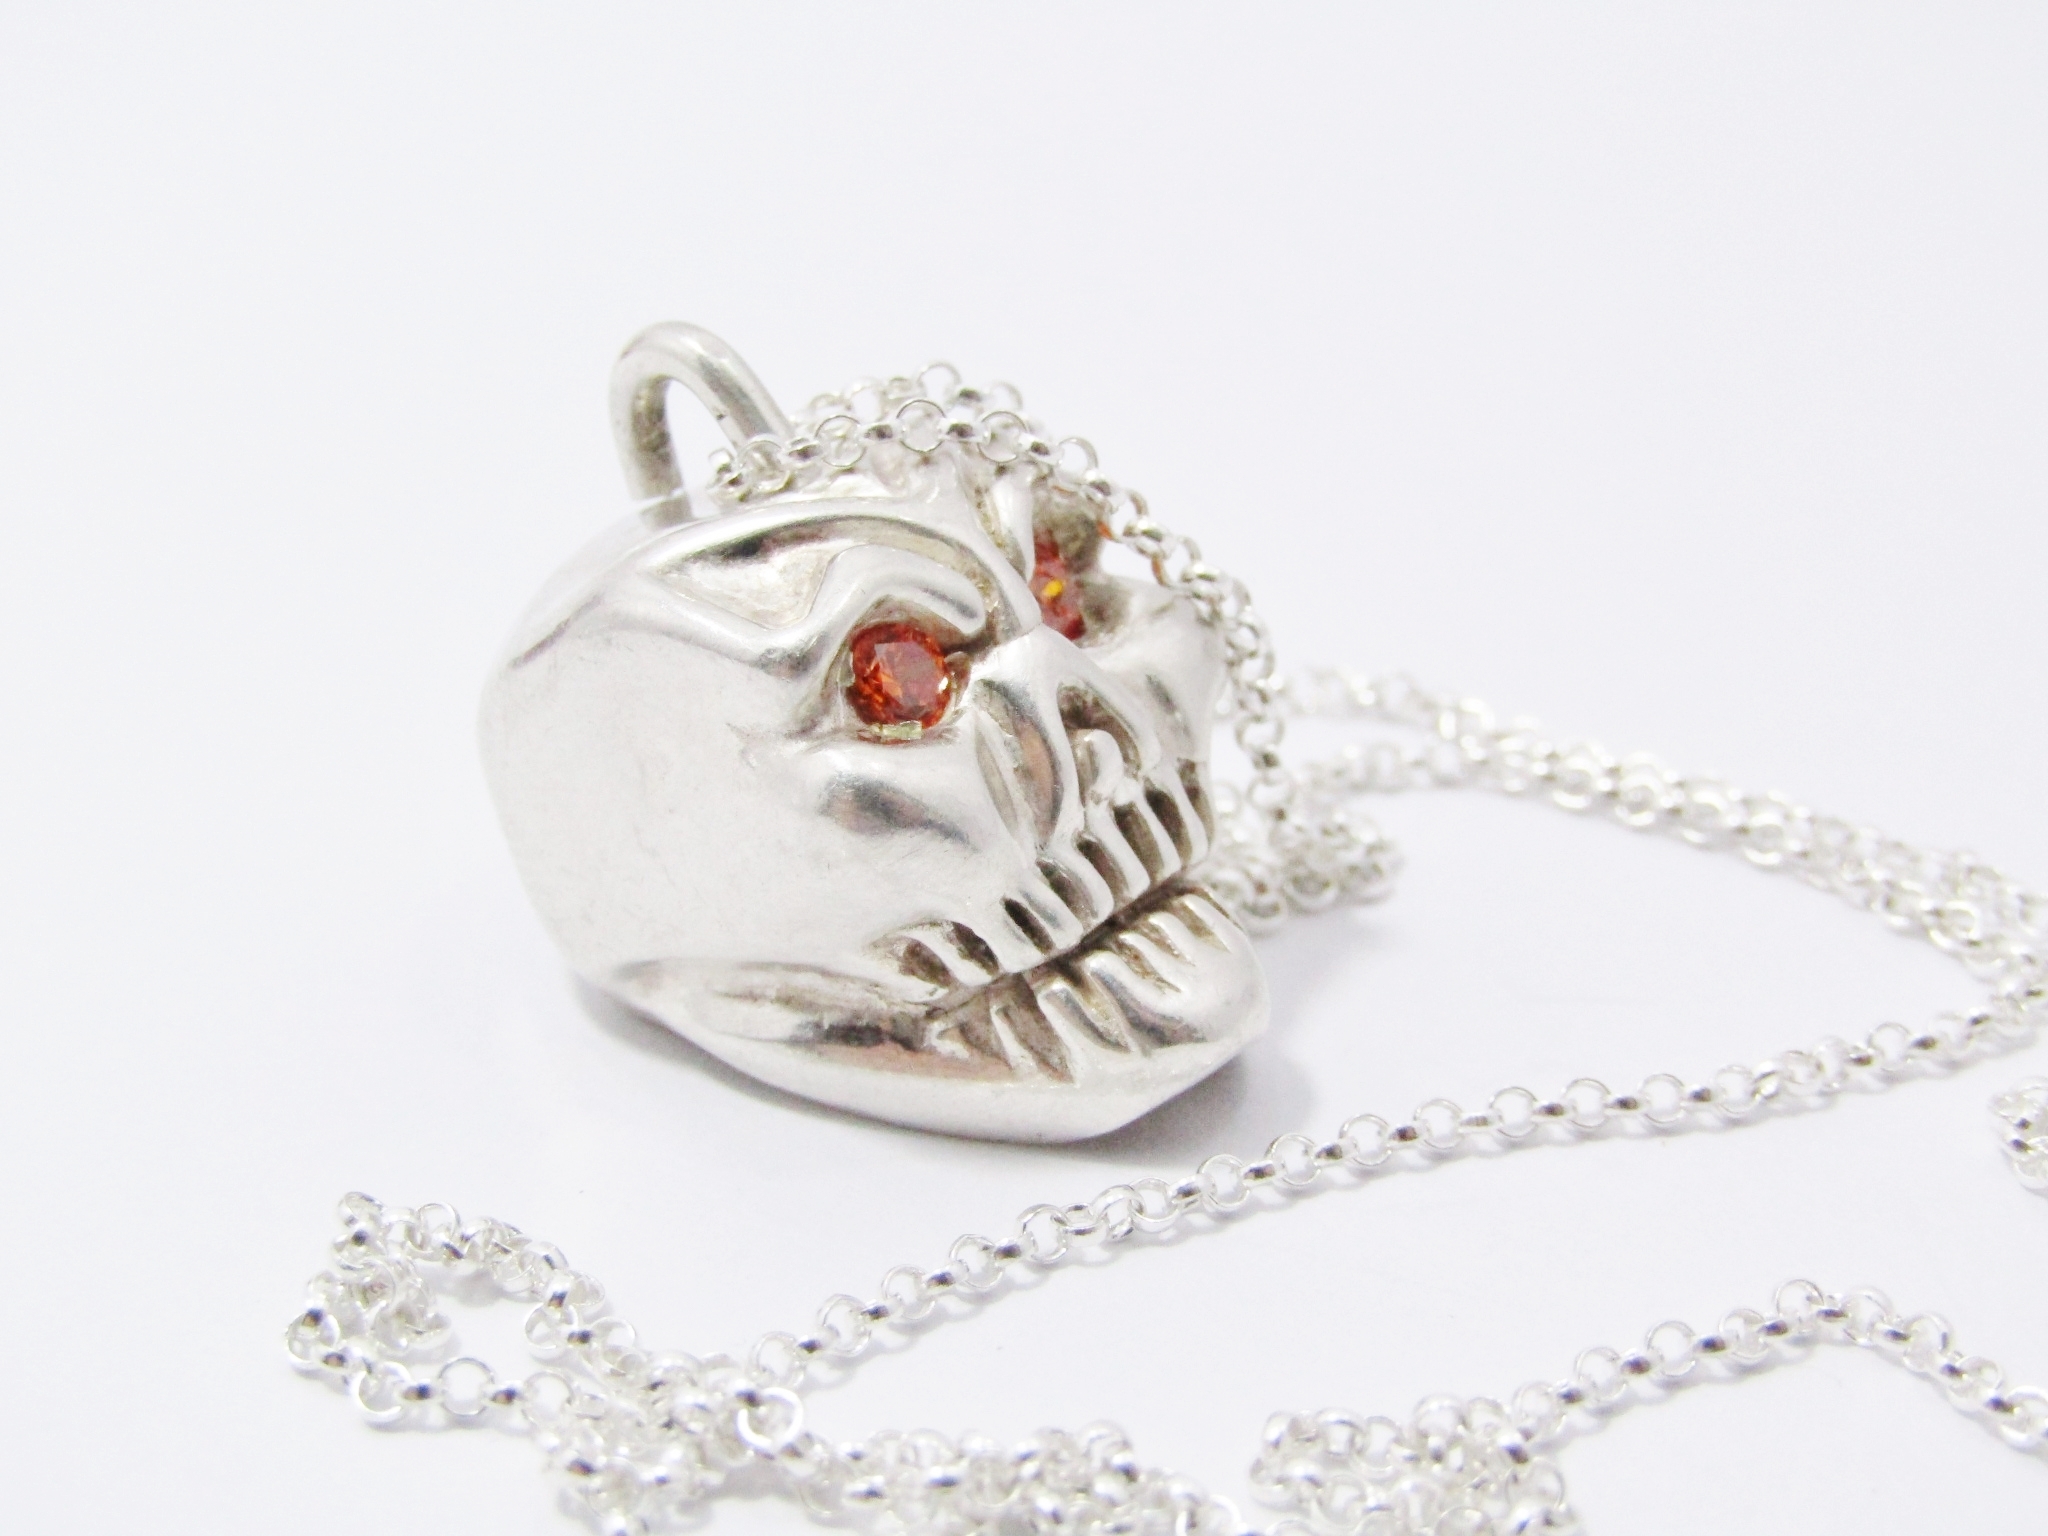 A Stunning Skull Pendant With Zirconia Eyes On Chain in Sterling Silver